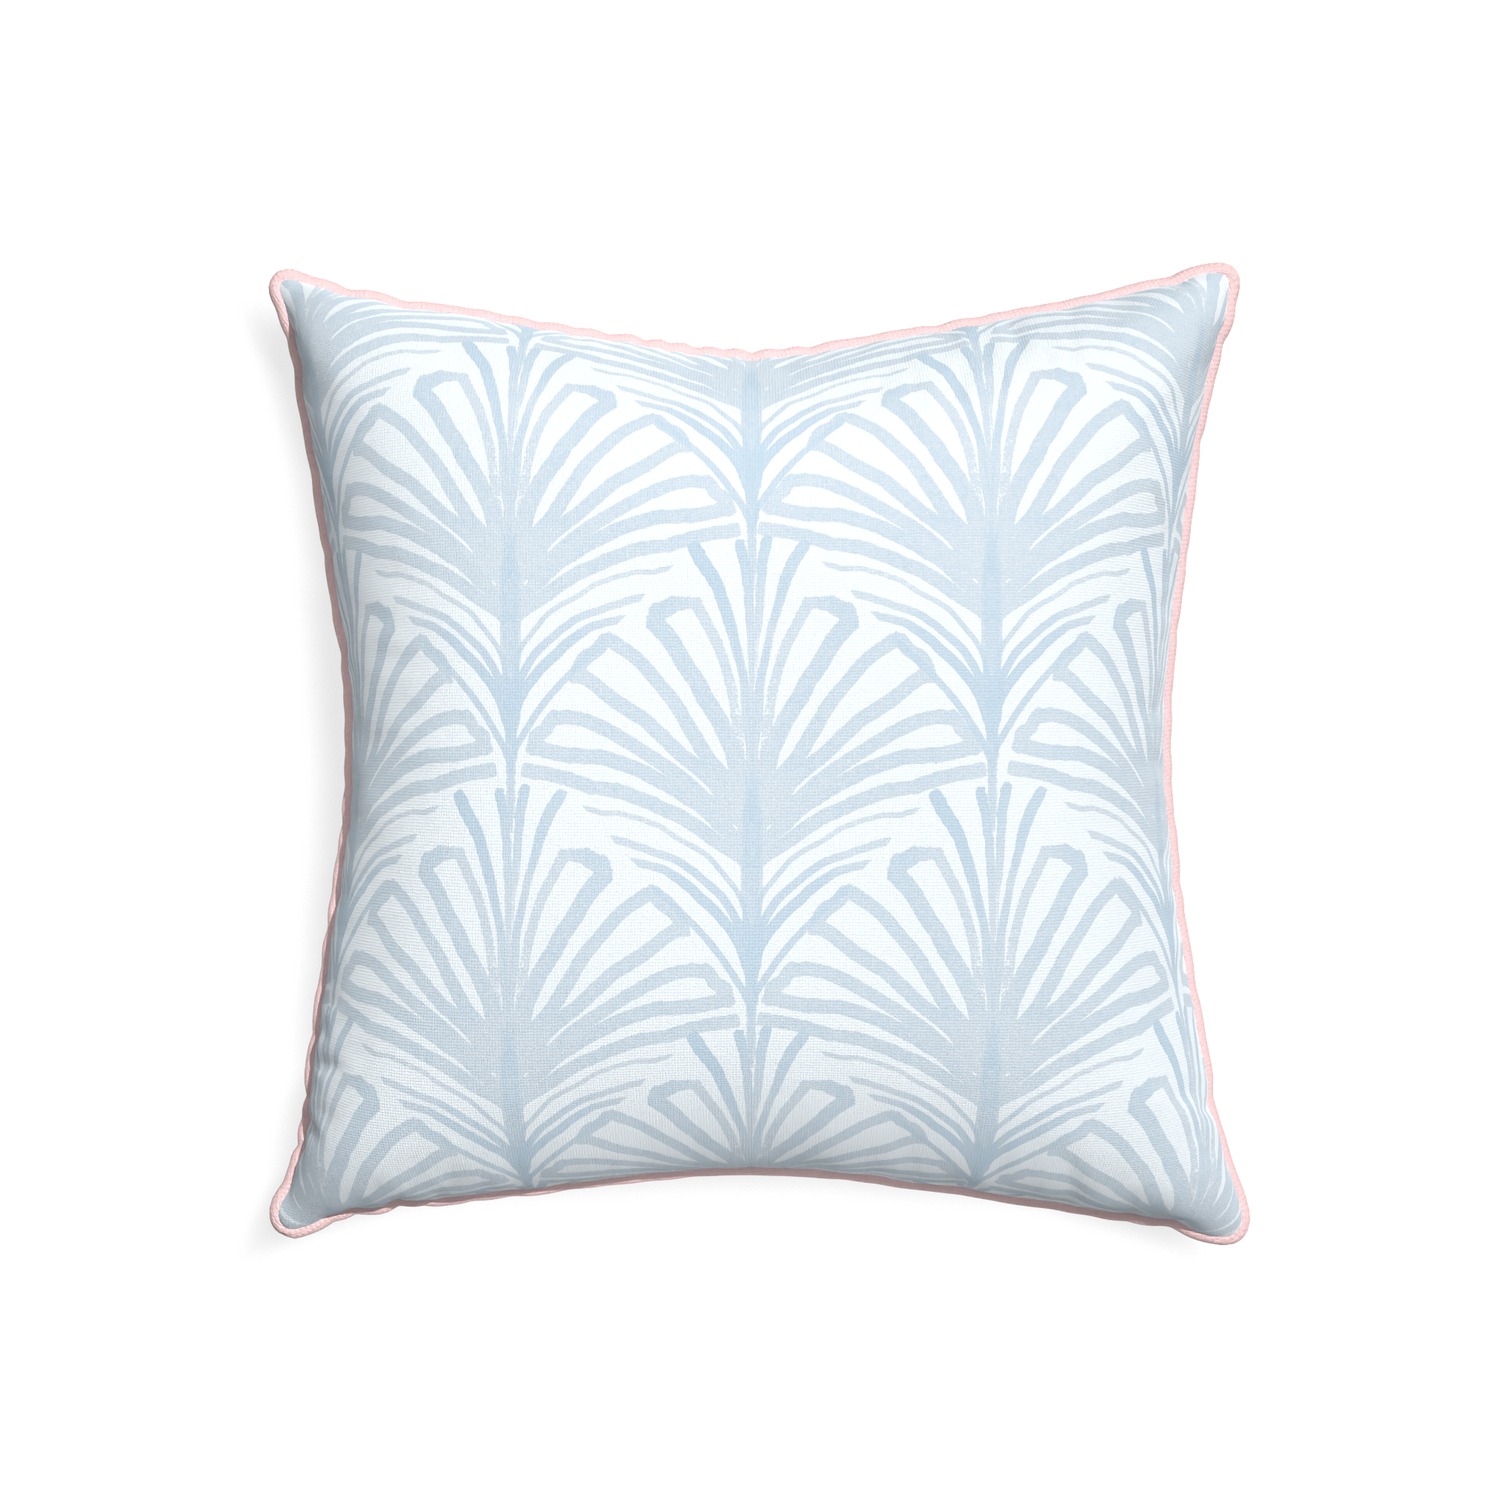 22-square suzy sky custom pillow with petal piping on white background